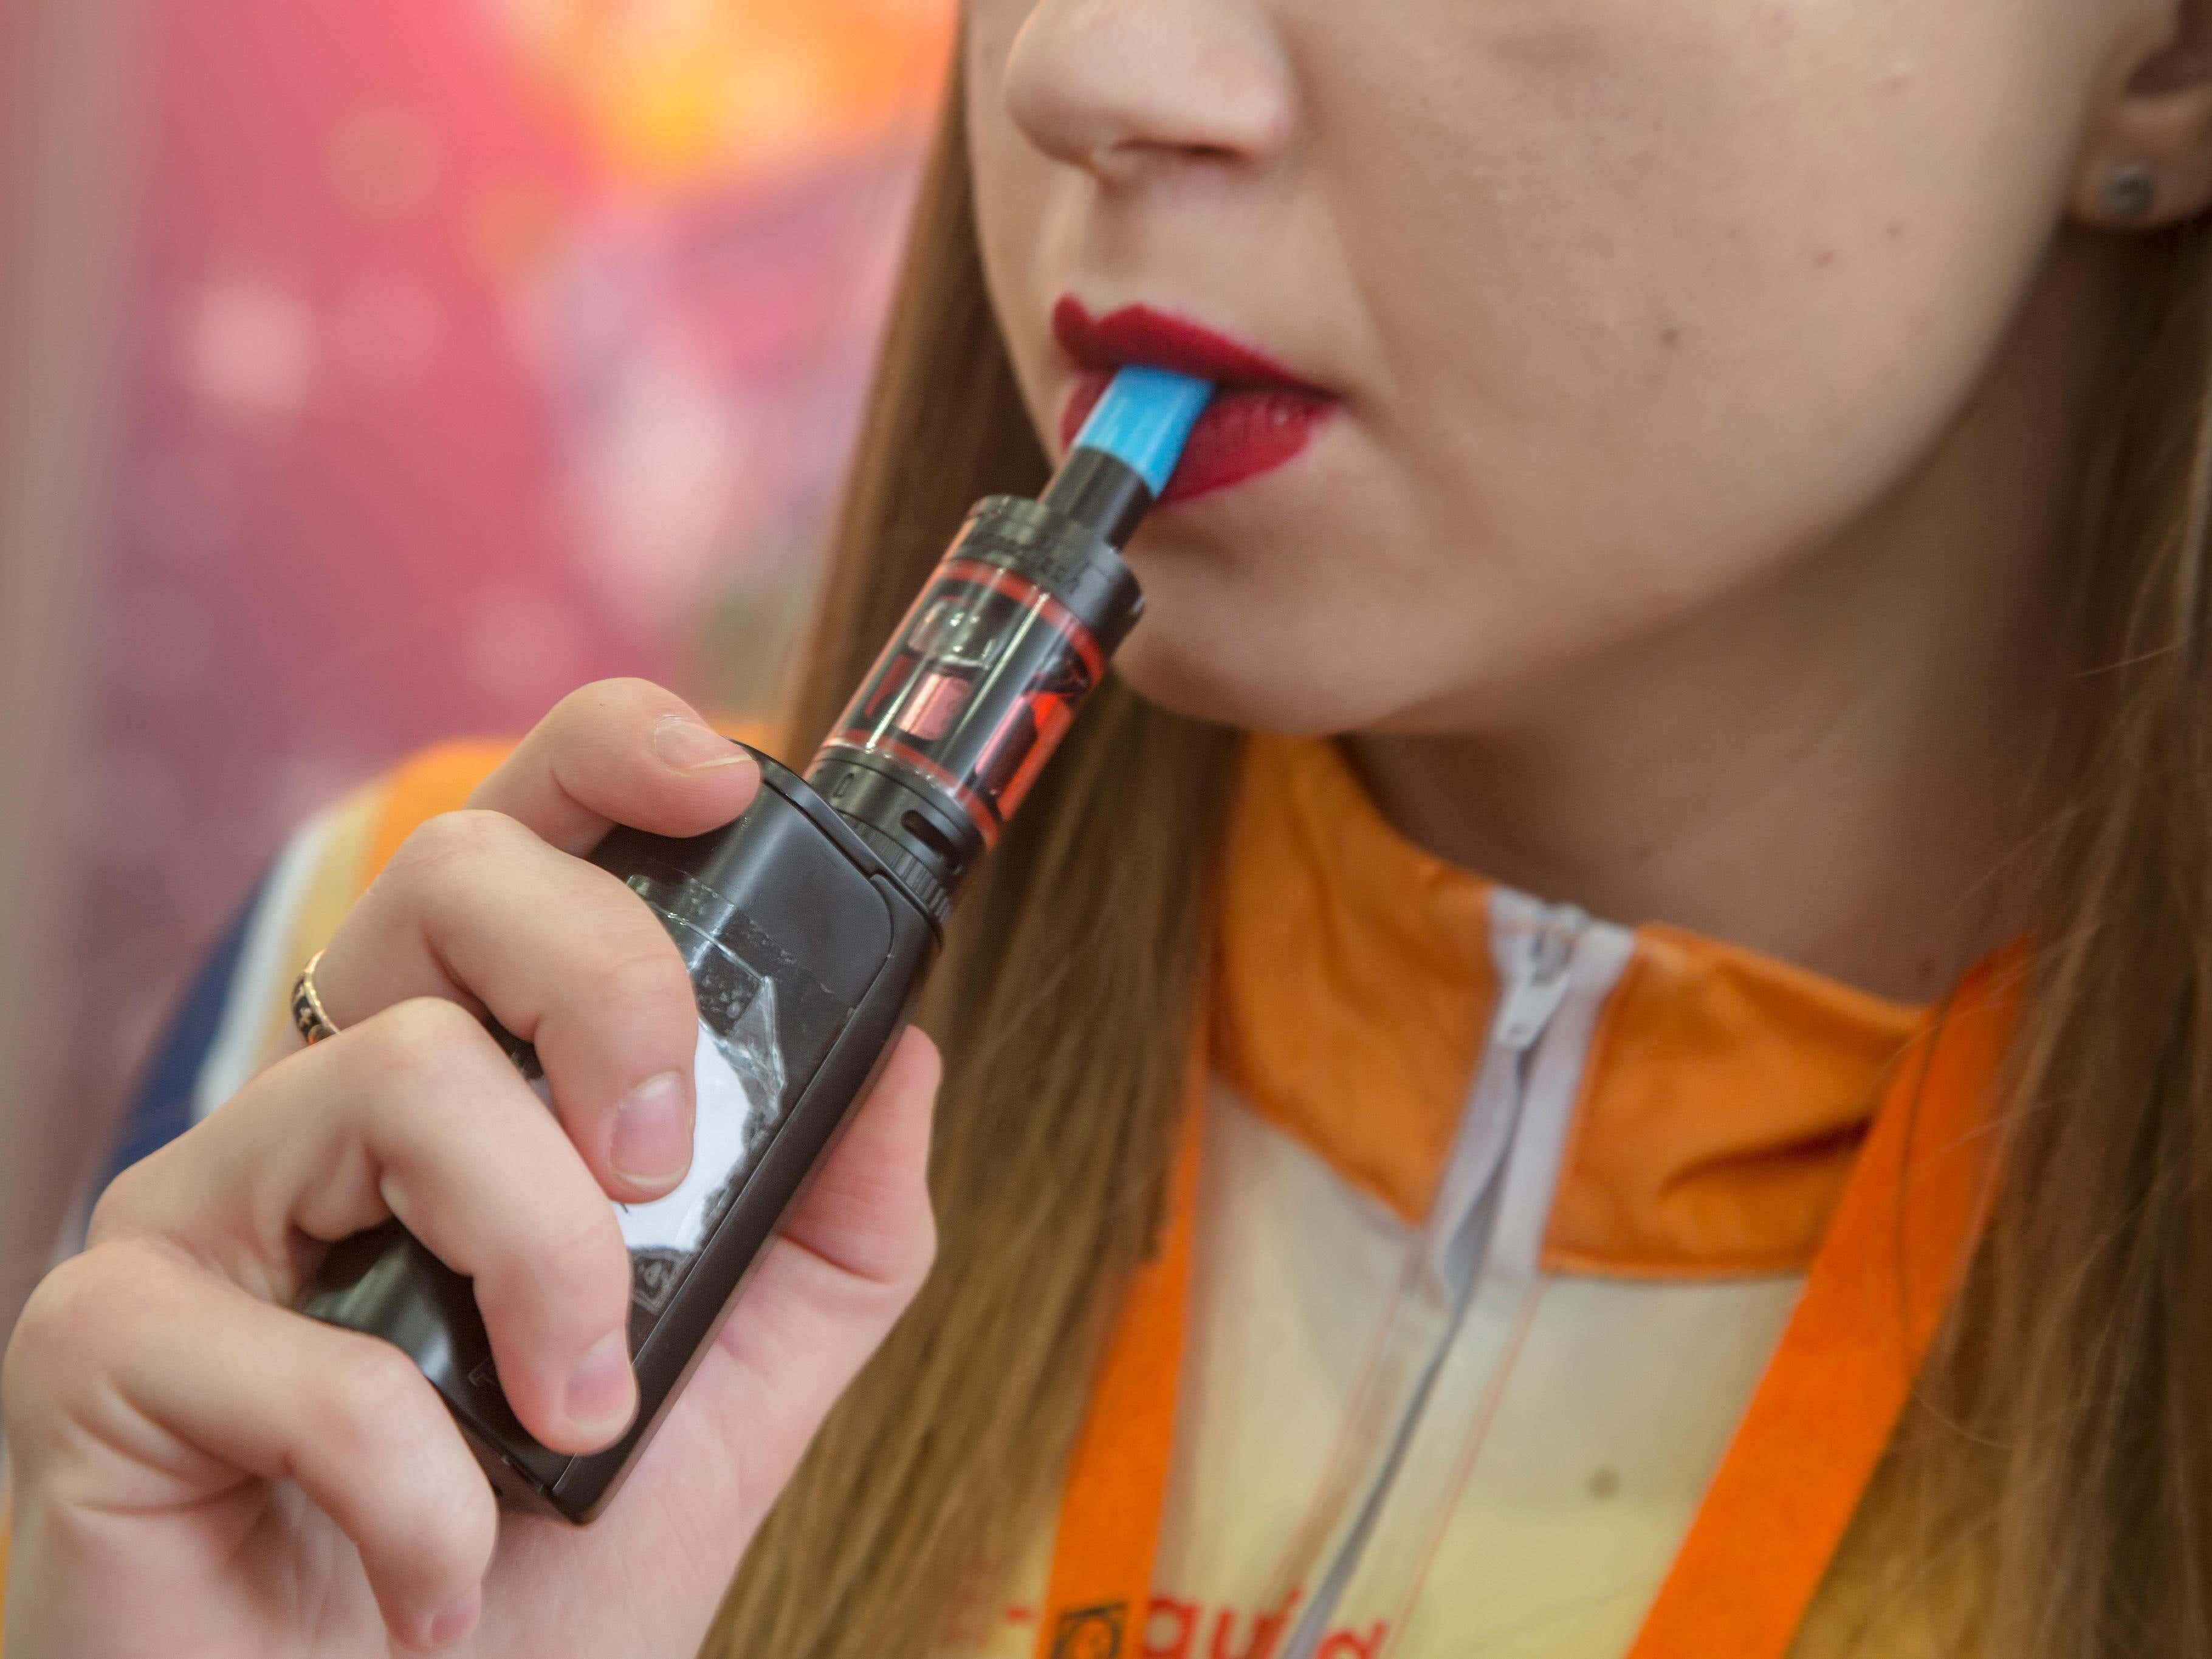 Young girls in the UK drinking, smoking and vaping more than boys